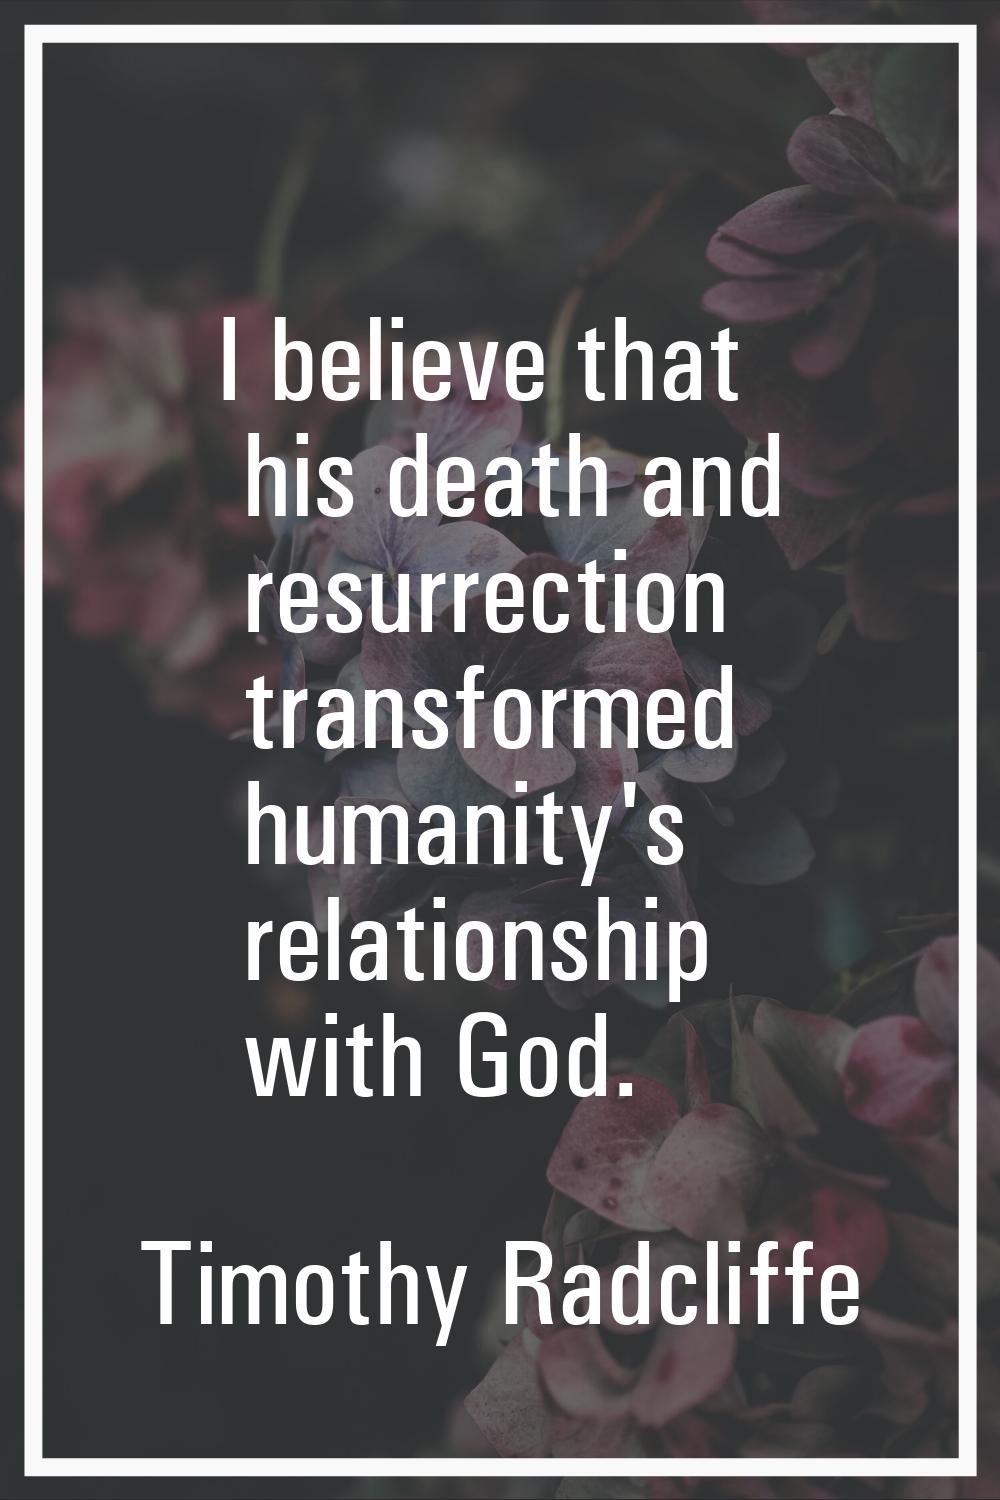 I believe that his death and resurrection transformed humanity's relationship with God.